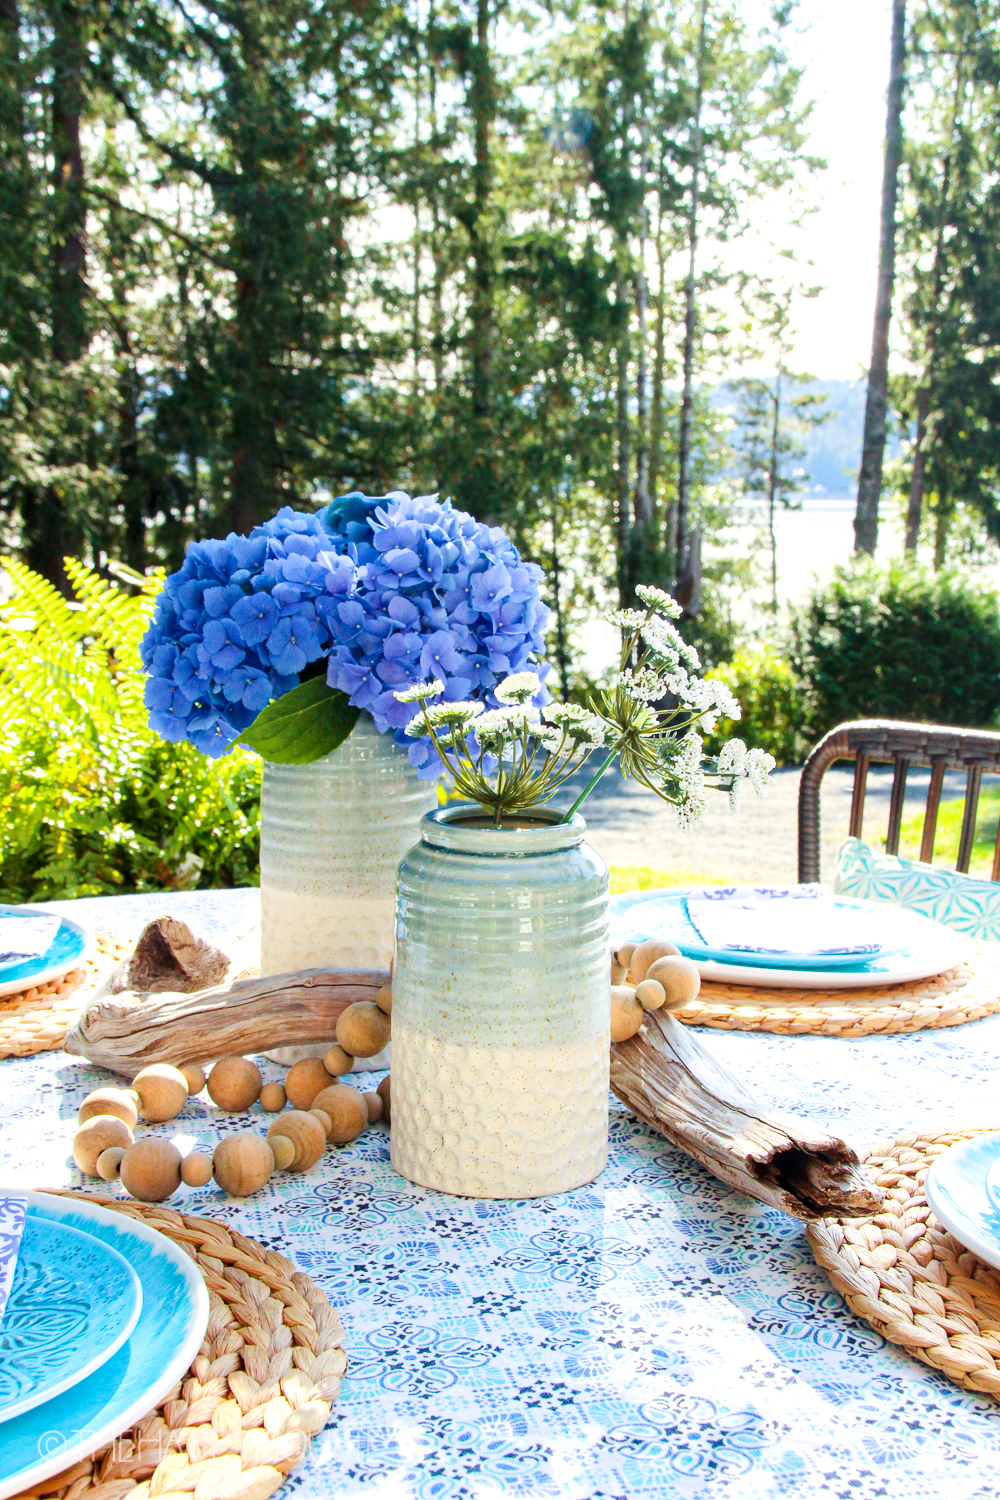 An outdoor table set with touches of blue.